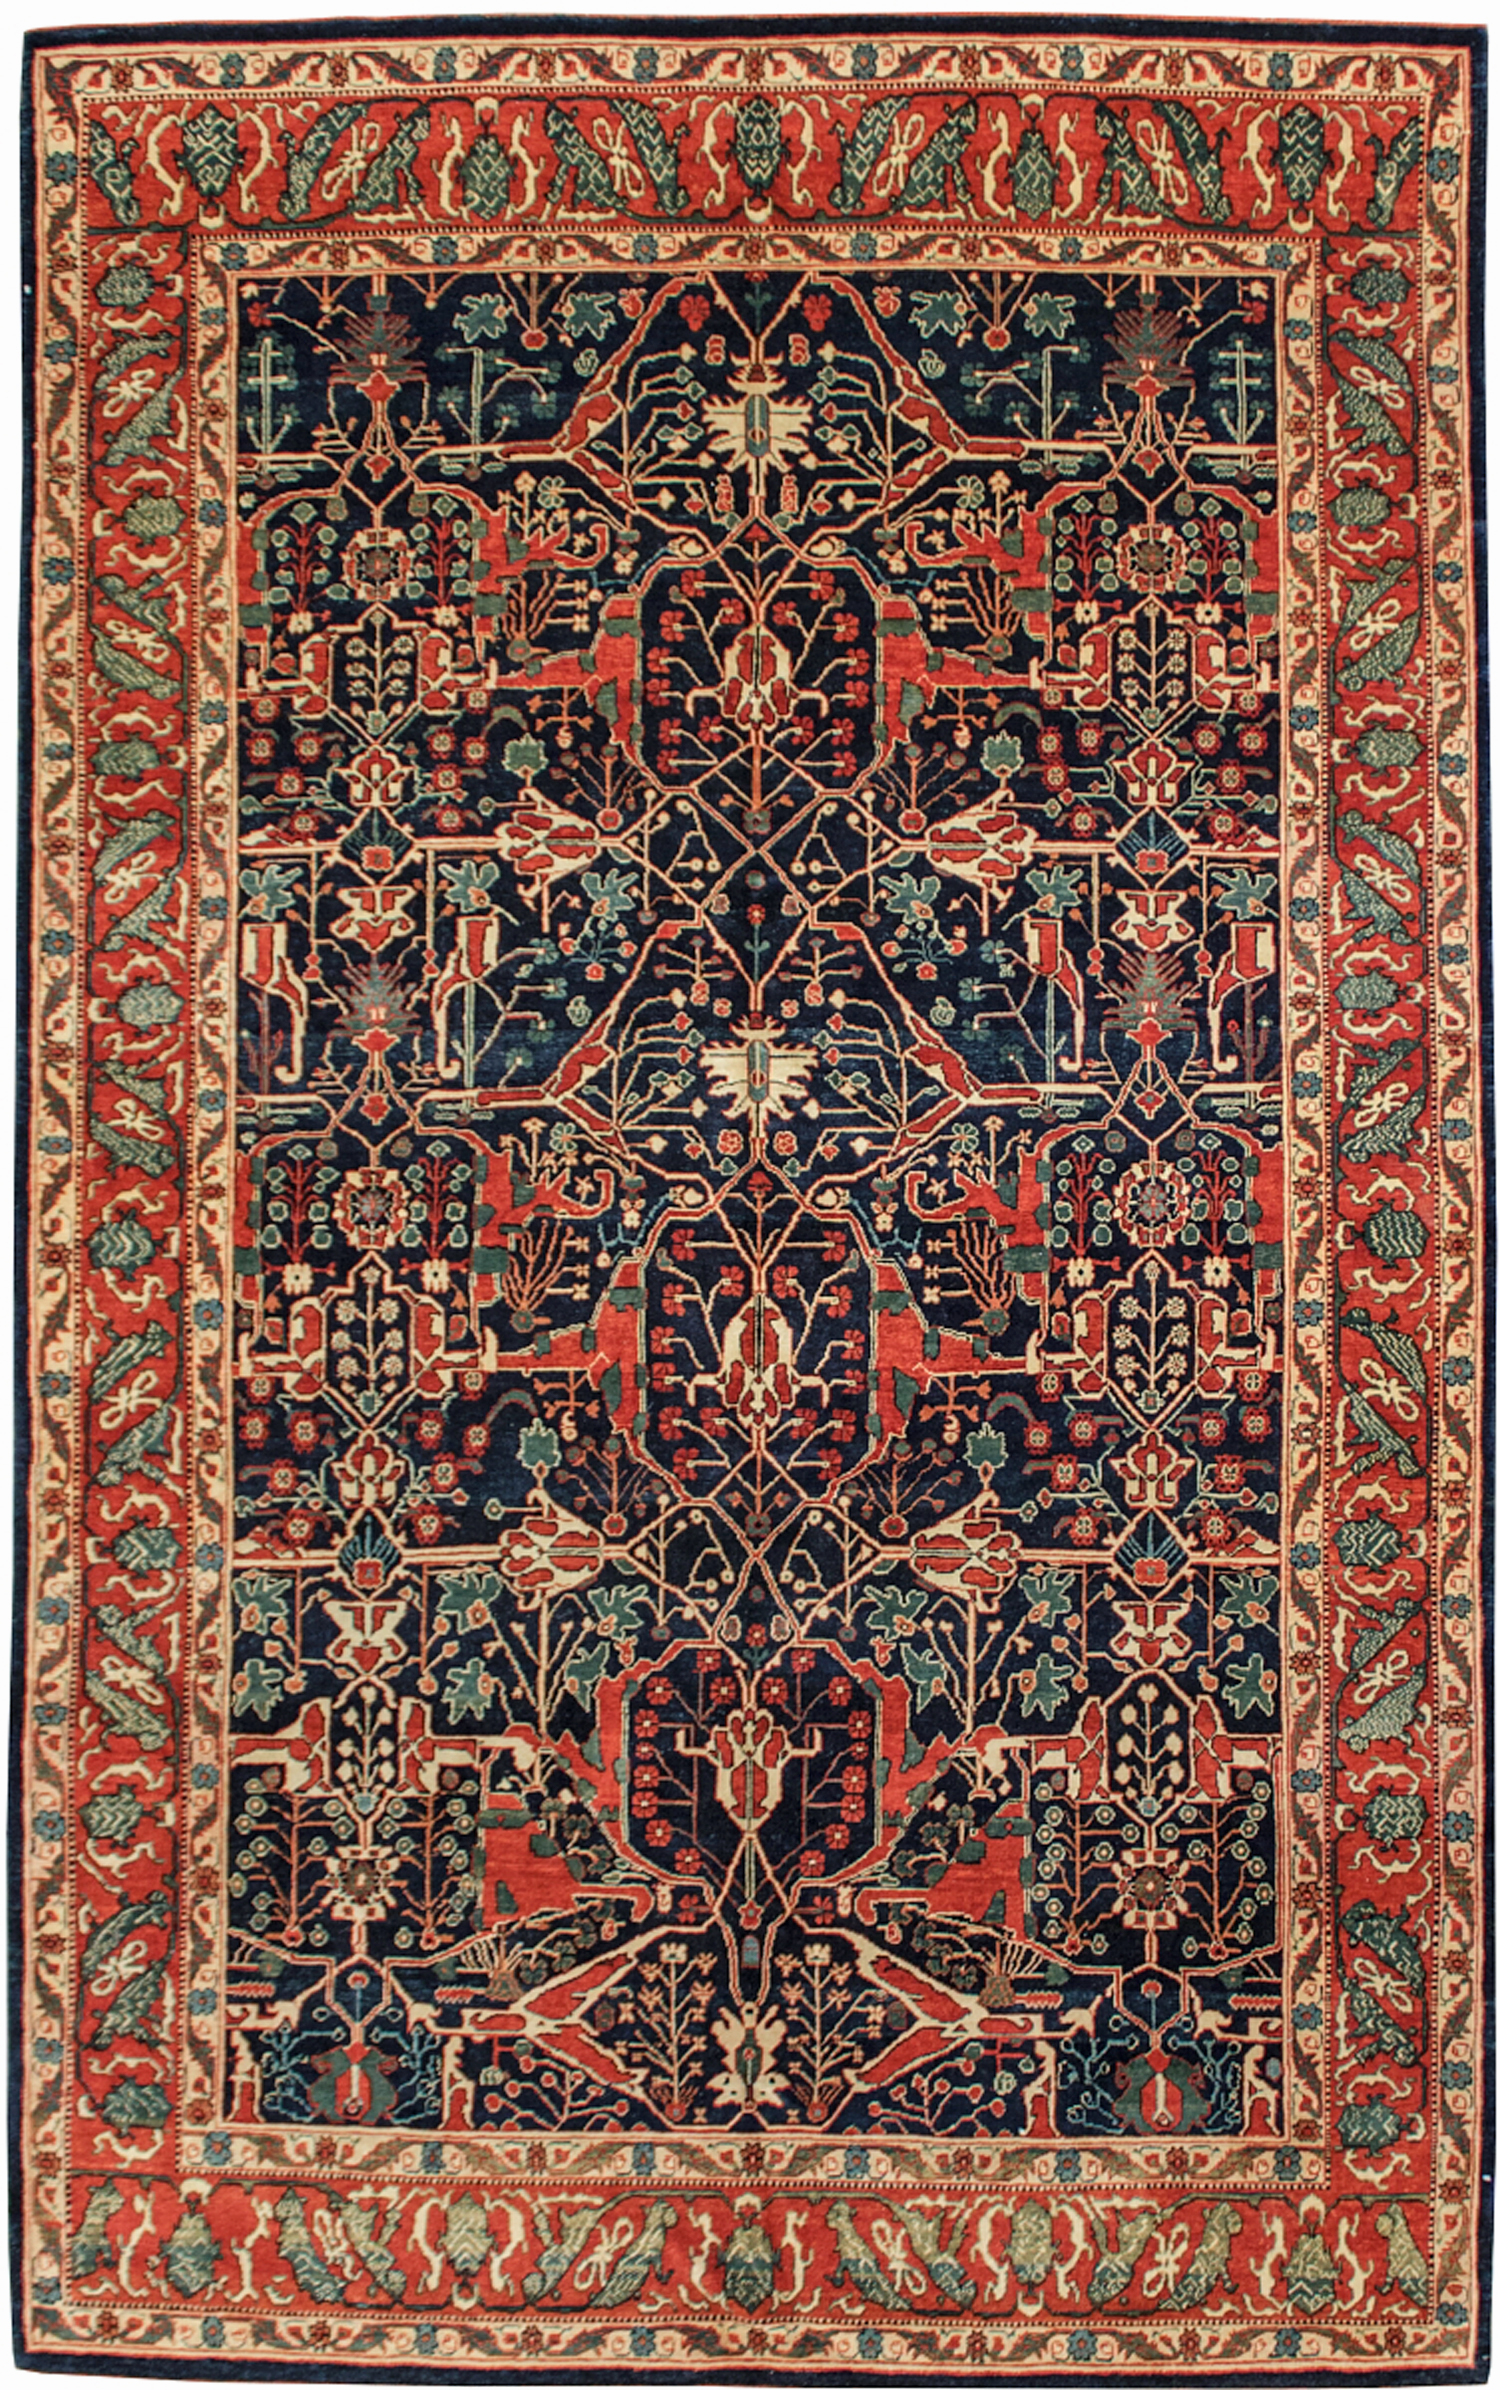 Douglas Stock Gallery features a select group of new, hand woven Oriental rug with natural dyes and hand spun wool. This is a new Turkish carpet featuring a Persian Bidjar Split Arabesque design on a navy field. Oriental rugs Boston,MA area